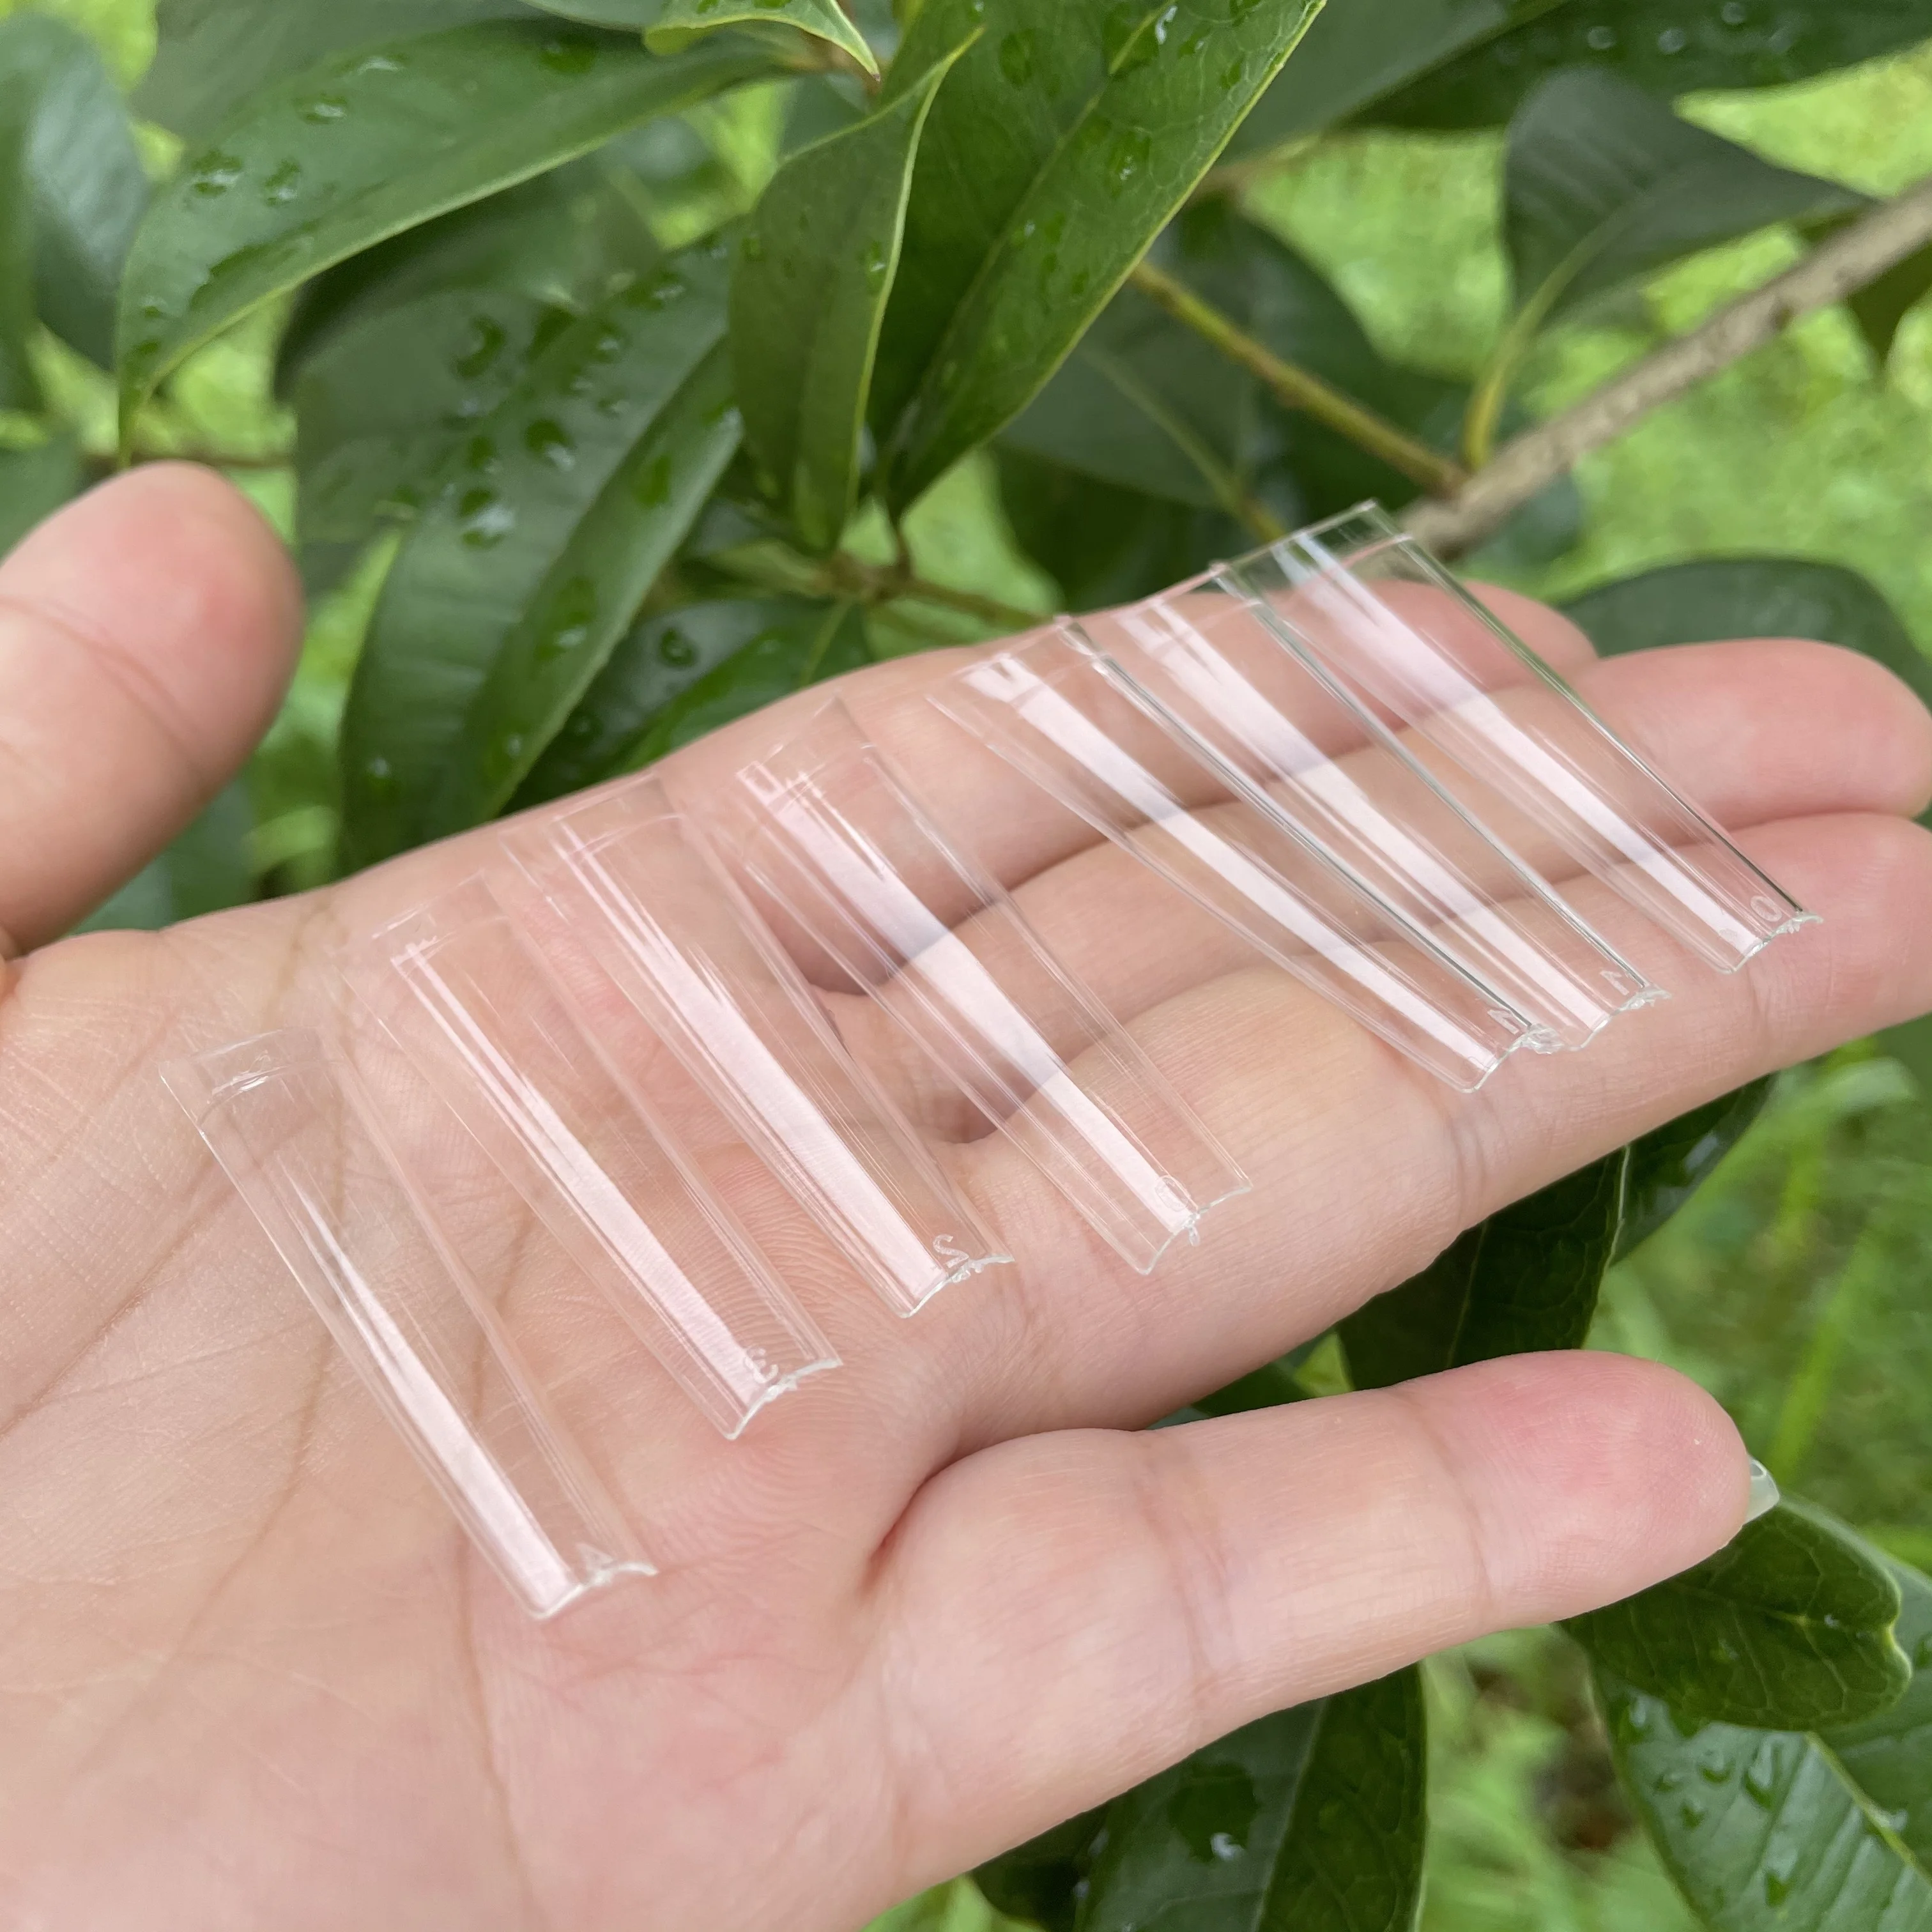 

Xxl Straight Long Coffin Tips Non C Curve Finger Nail Tip New Arrival Acrylic Abs Square Tips For Over 40mm Length, Natural white clear